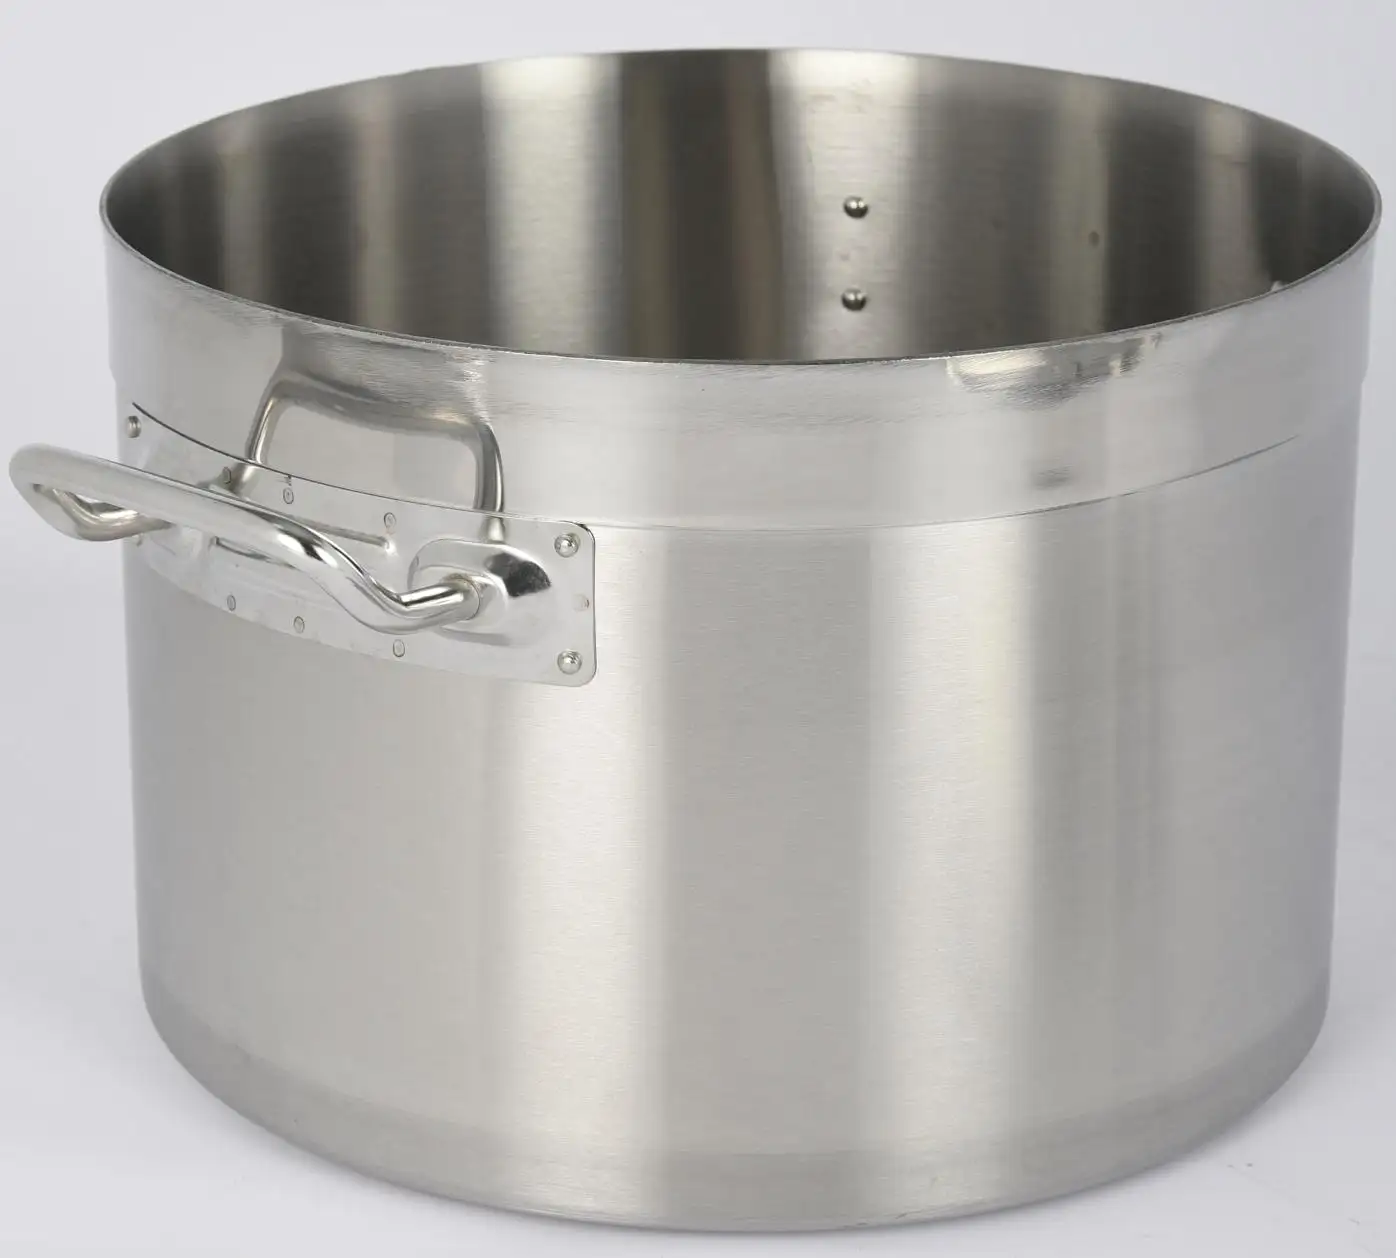 The Factory Directly Supplies High-quality Stainless Steel Soup Bucket Soup Por For Induction Cookers Or Gas /Customizable